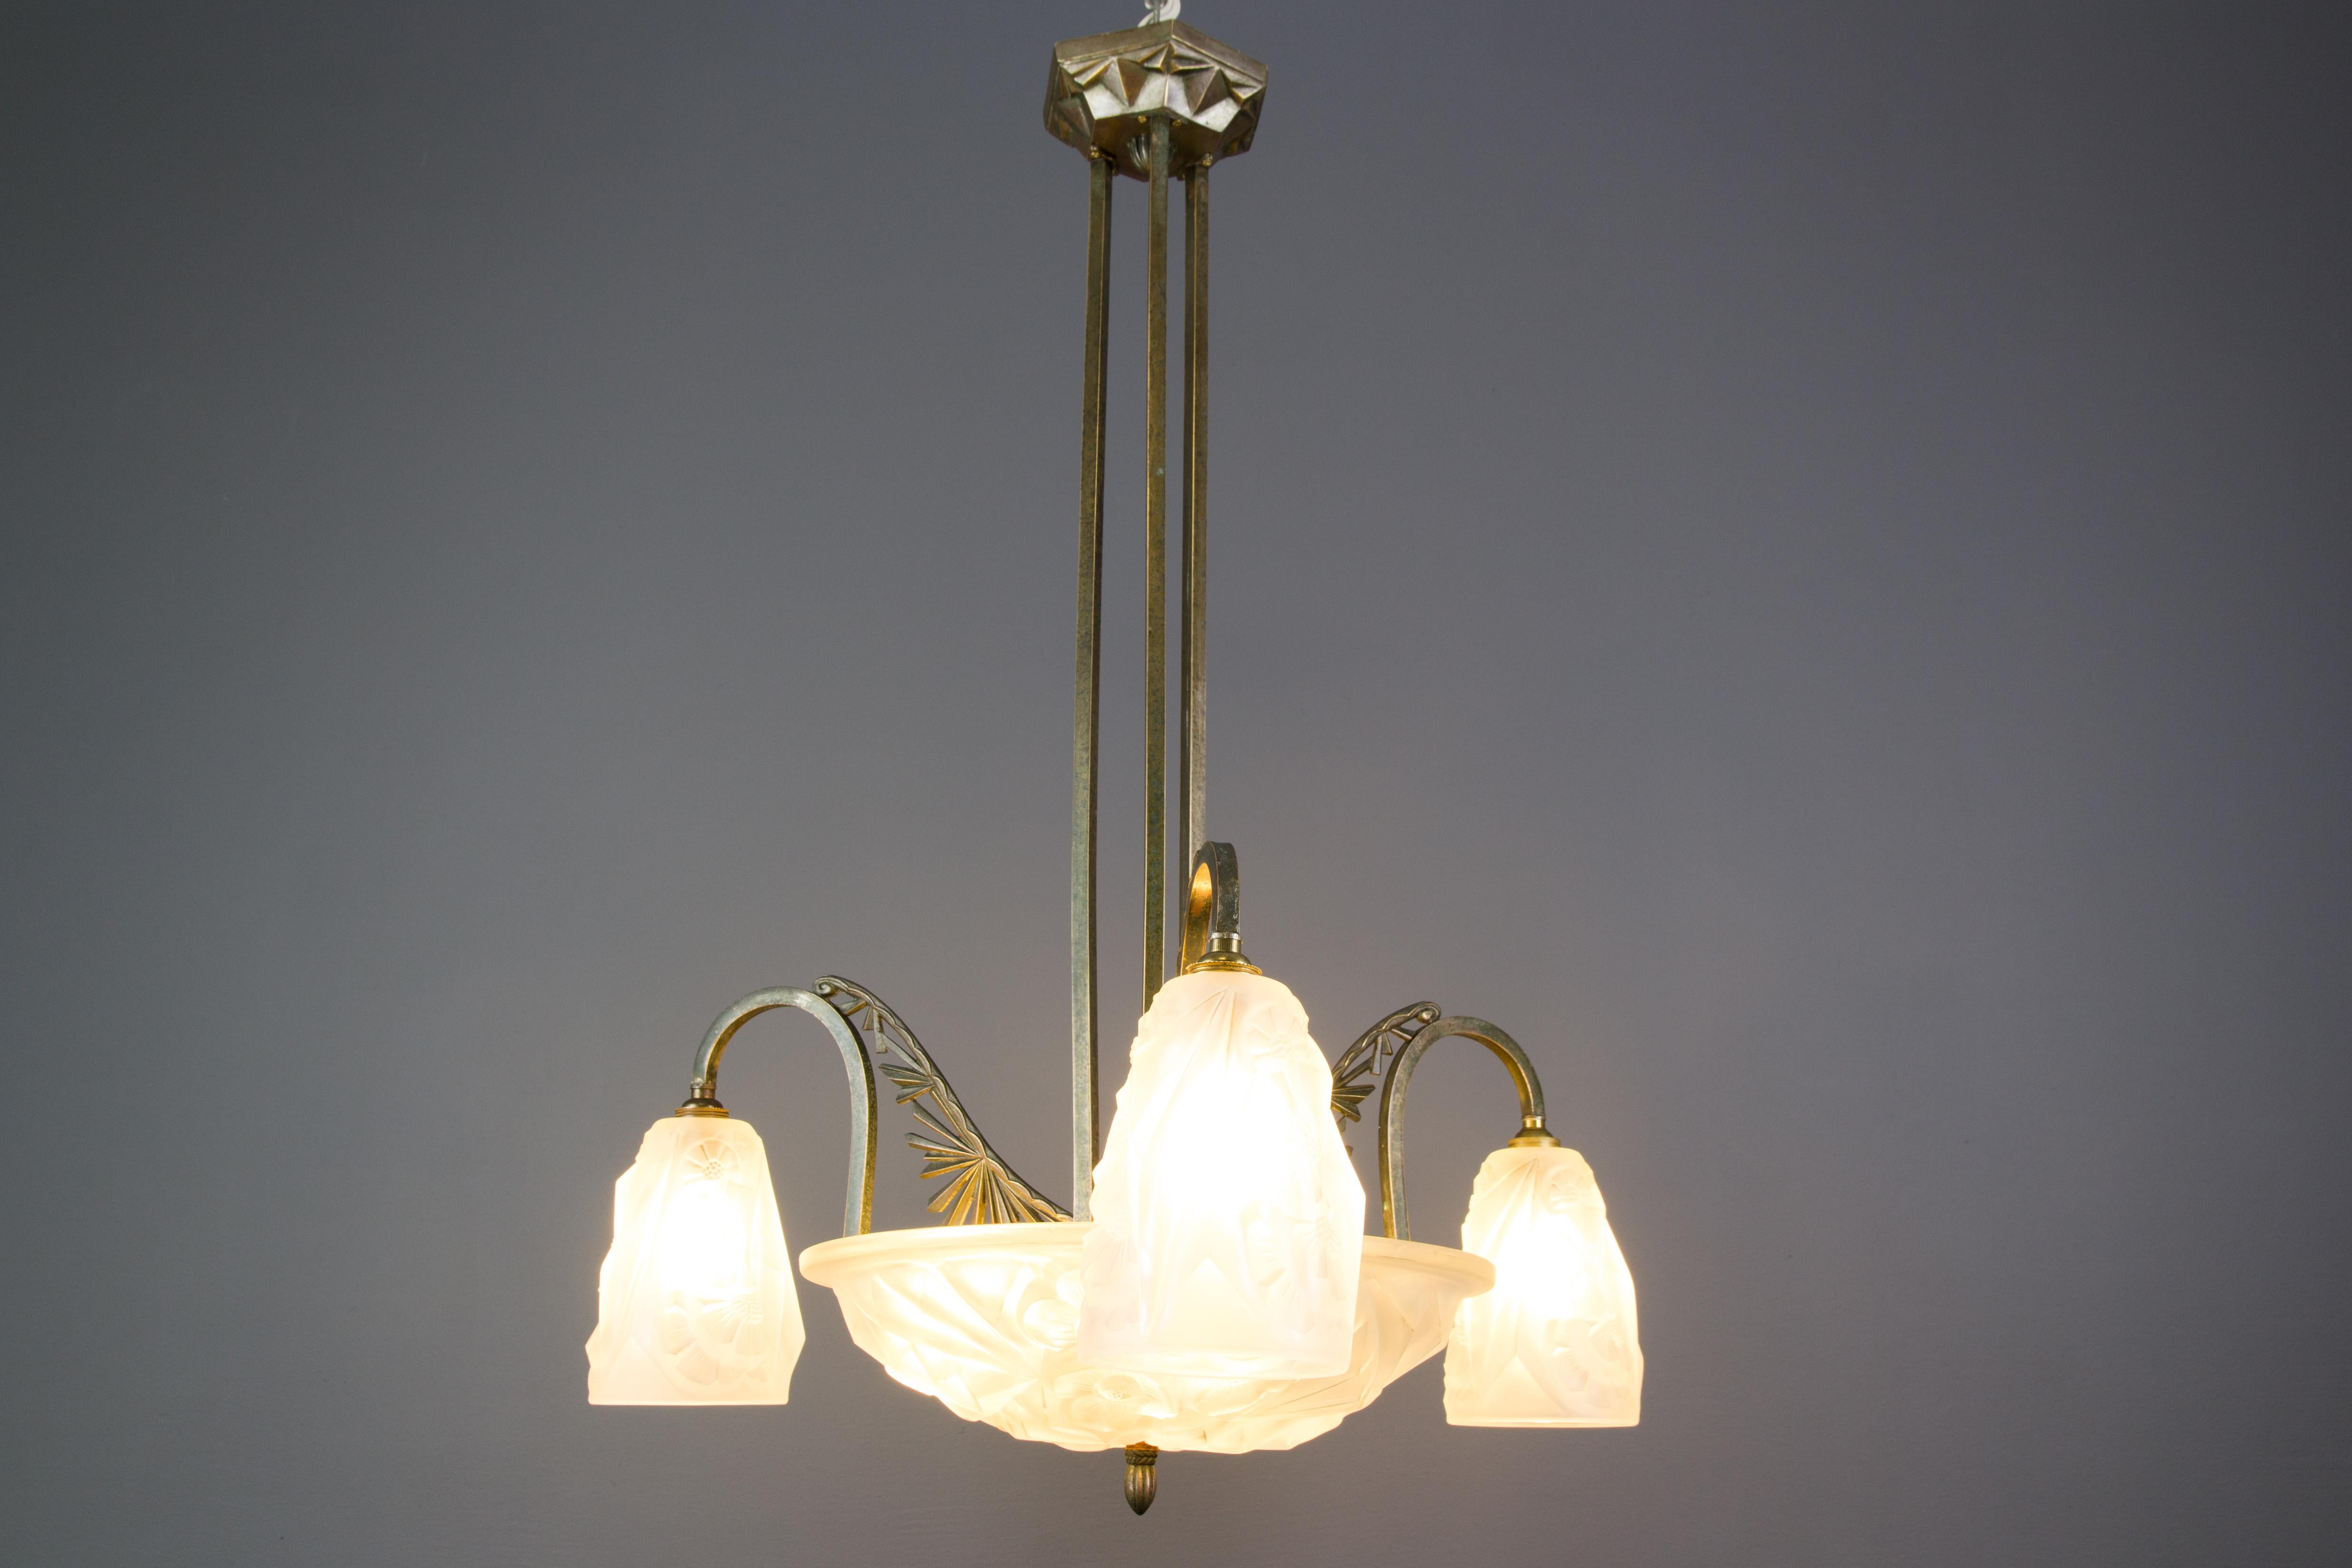 This beautiful French Art Deco six-light chandelier features white frosted molded-pressed glass shades with stylized flower motifs and an elegant bronze frame with three branches, decorated with geometrical Art Deco style elements. The glass shades